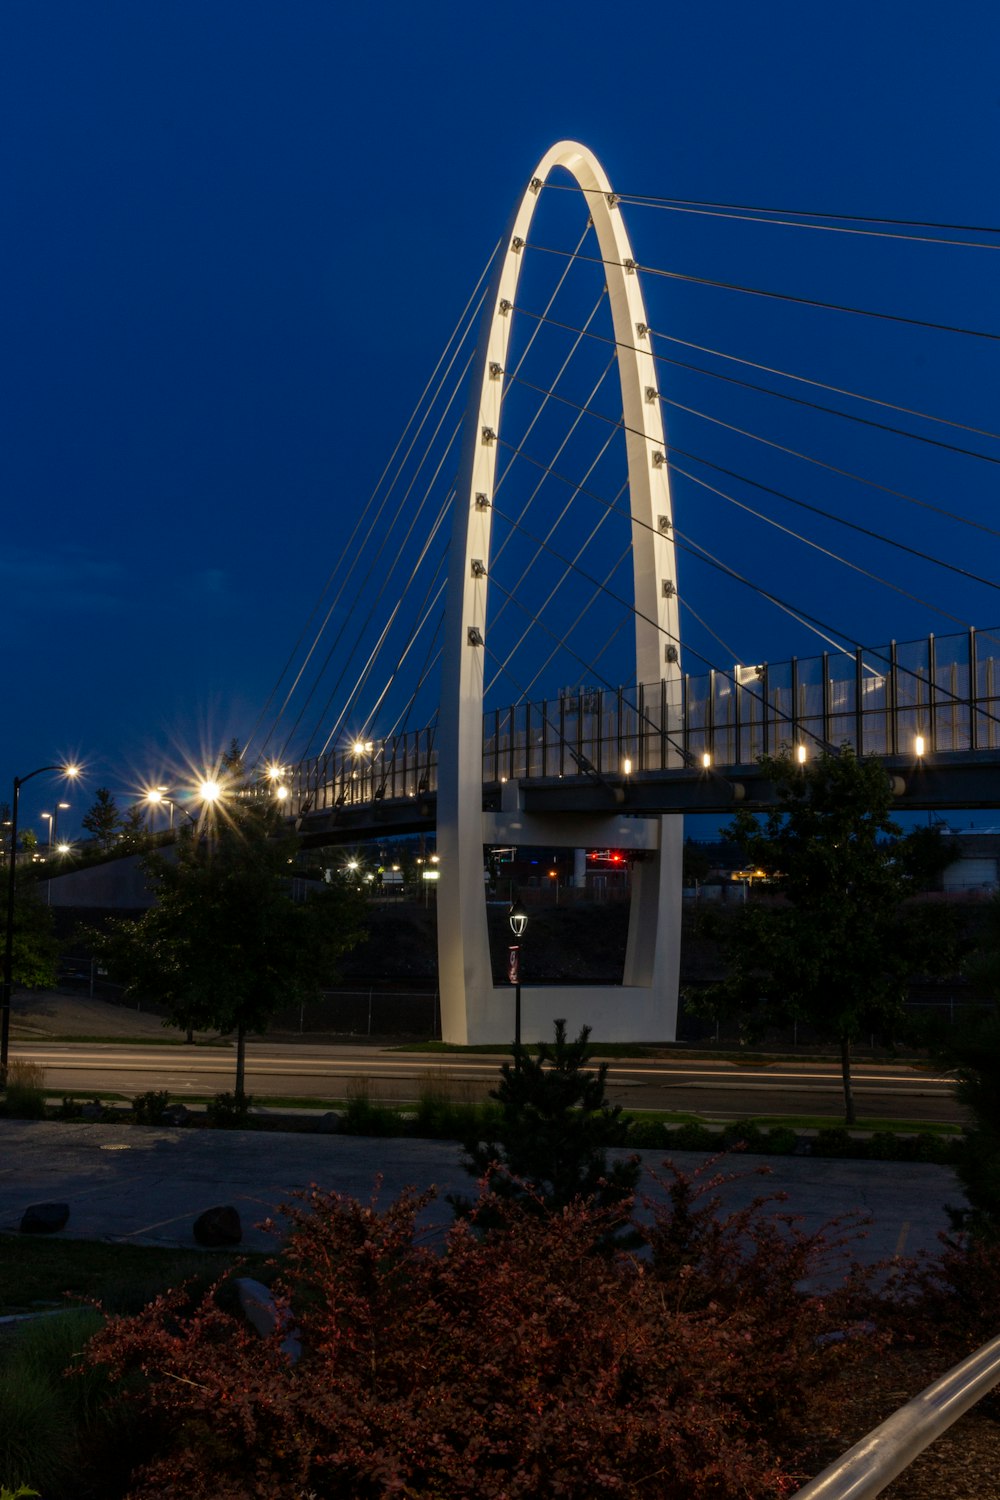 white and gray bridge under blue sky during night time